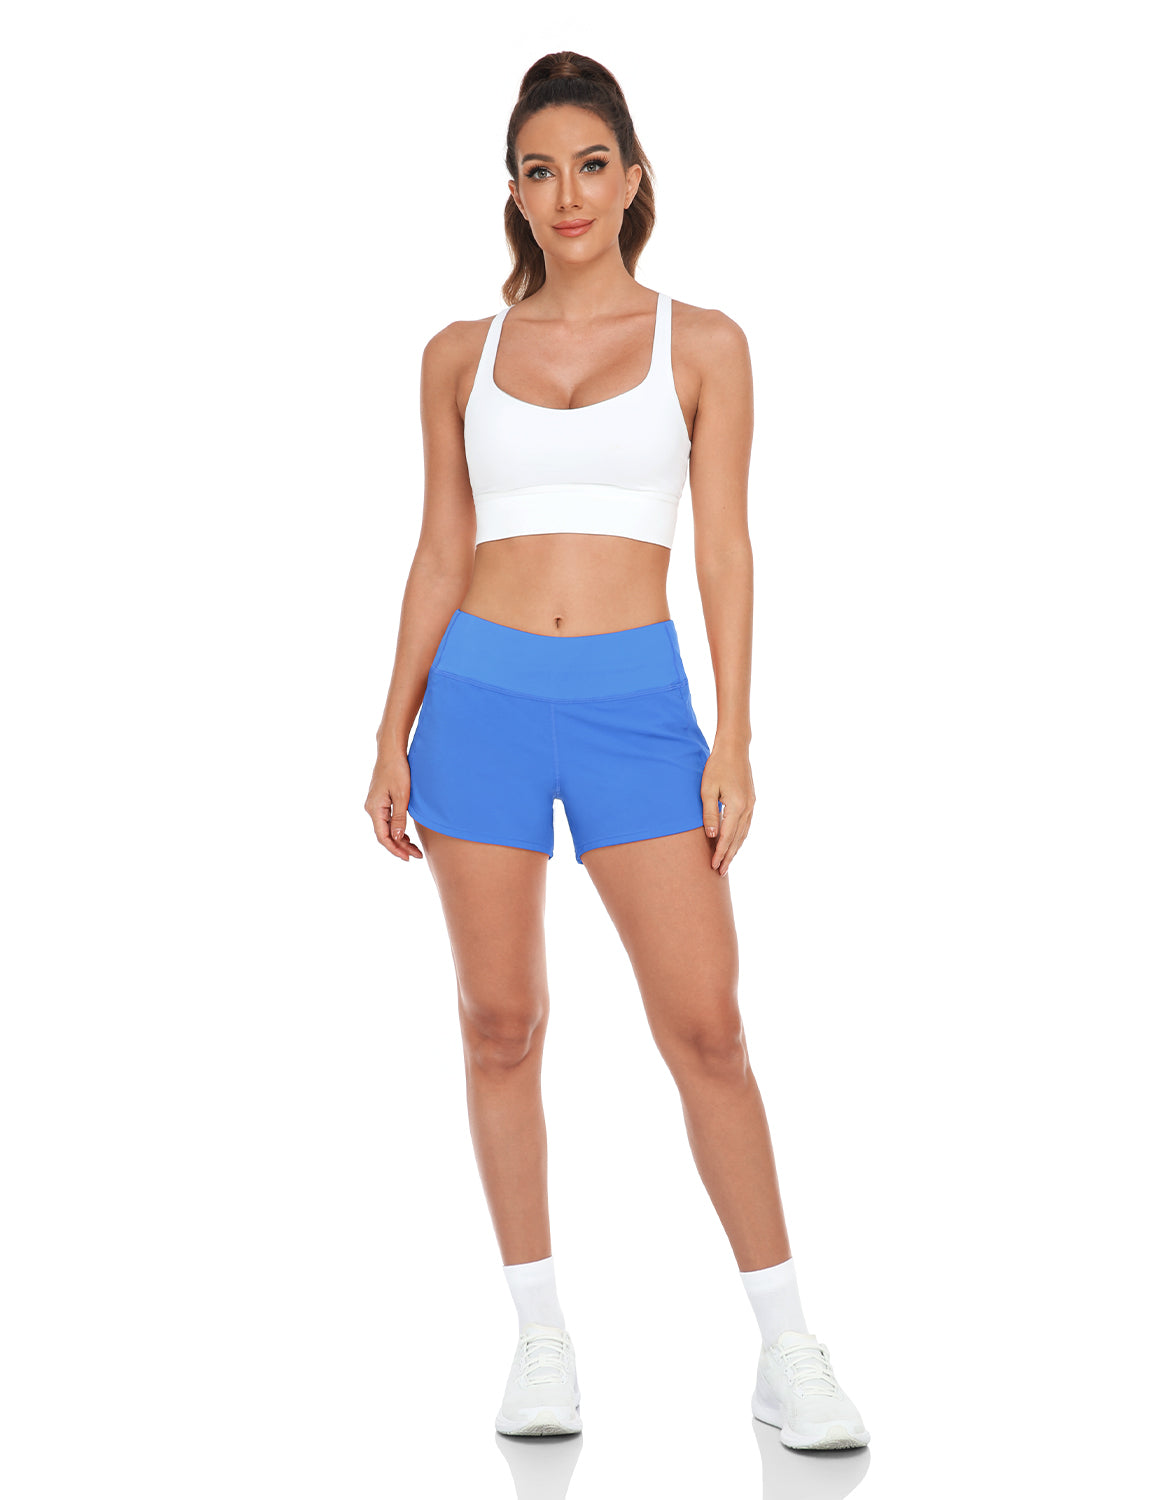  HeyNuts Focus Running Shorts For Women, Low Waisted Athletic  Shorts Lined Workout Shorts